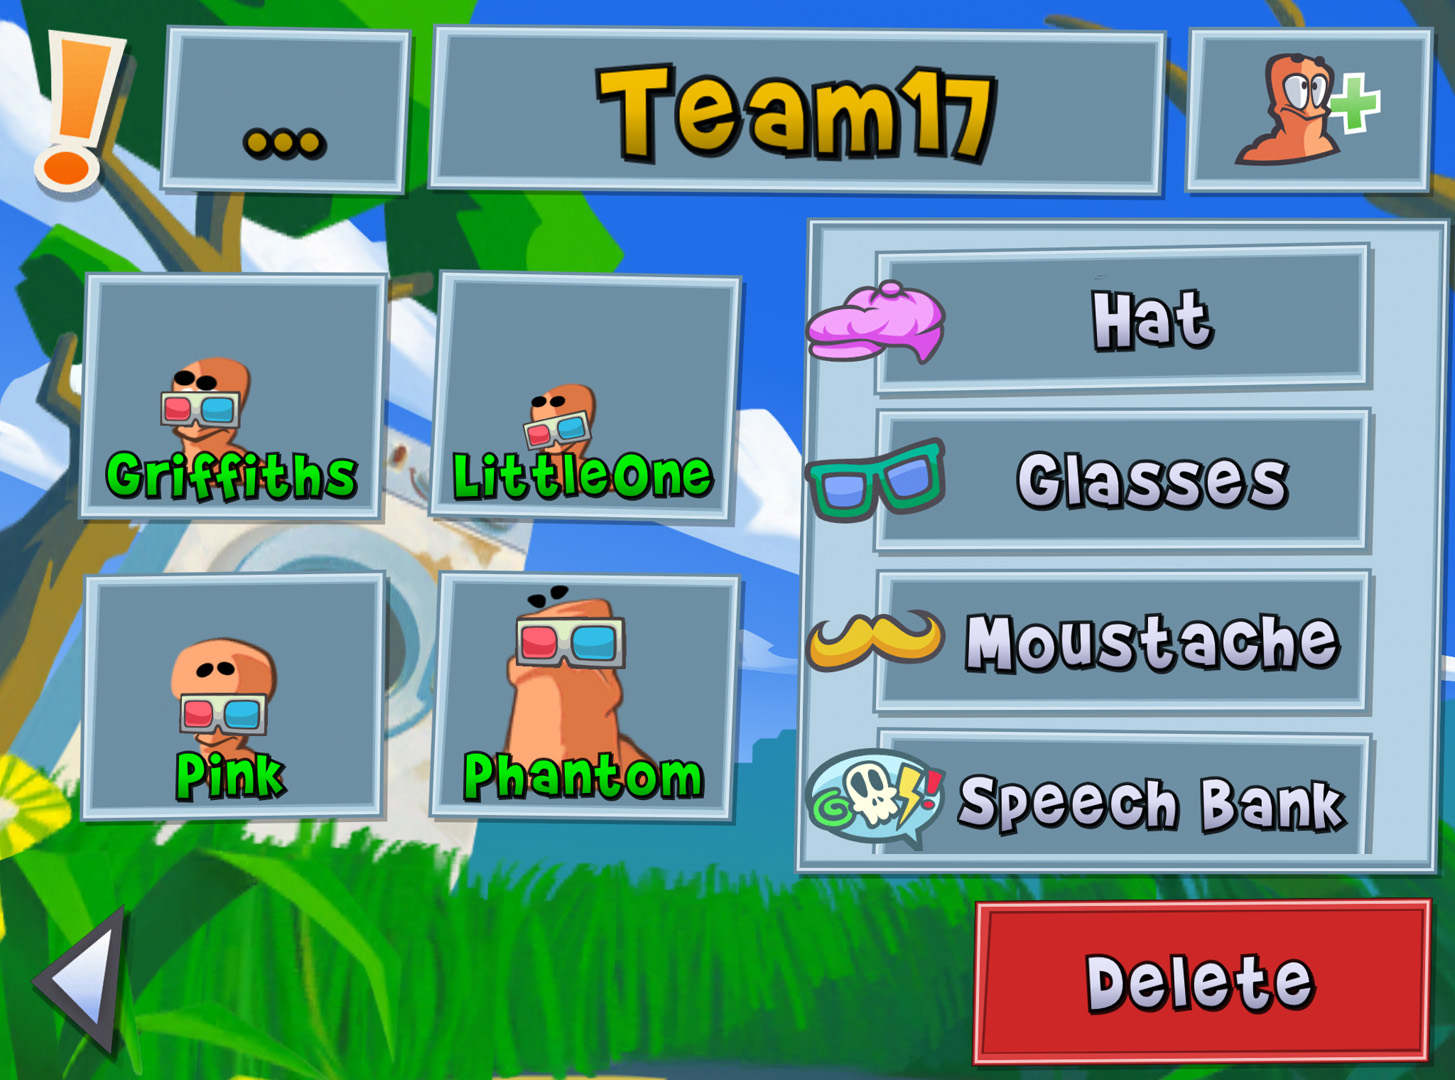 Team17 Finally Making Worms 3. No, Worms 3D Didn’t Count.